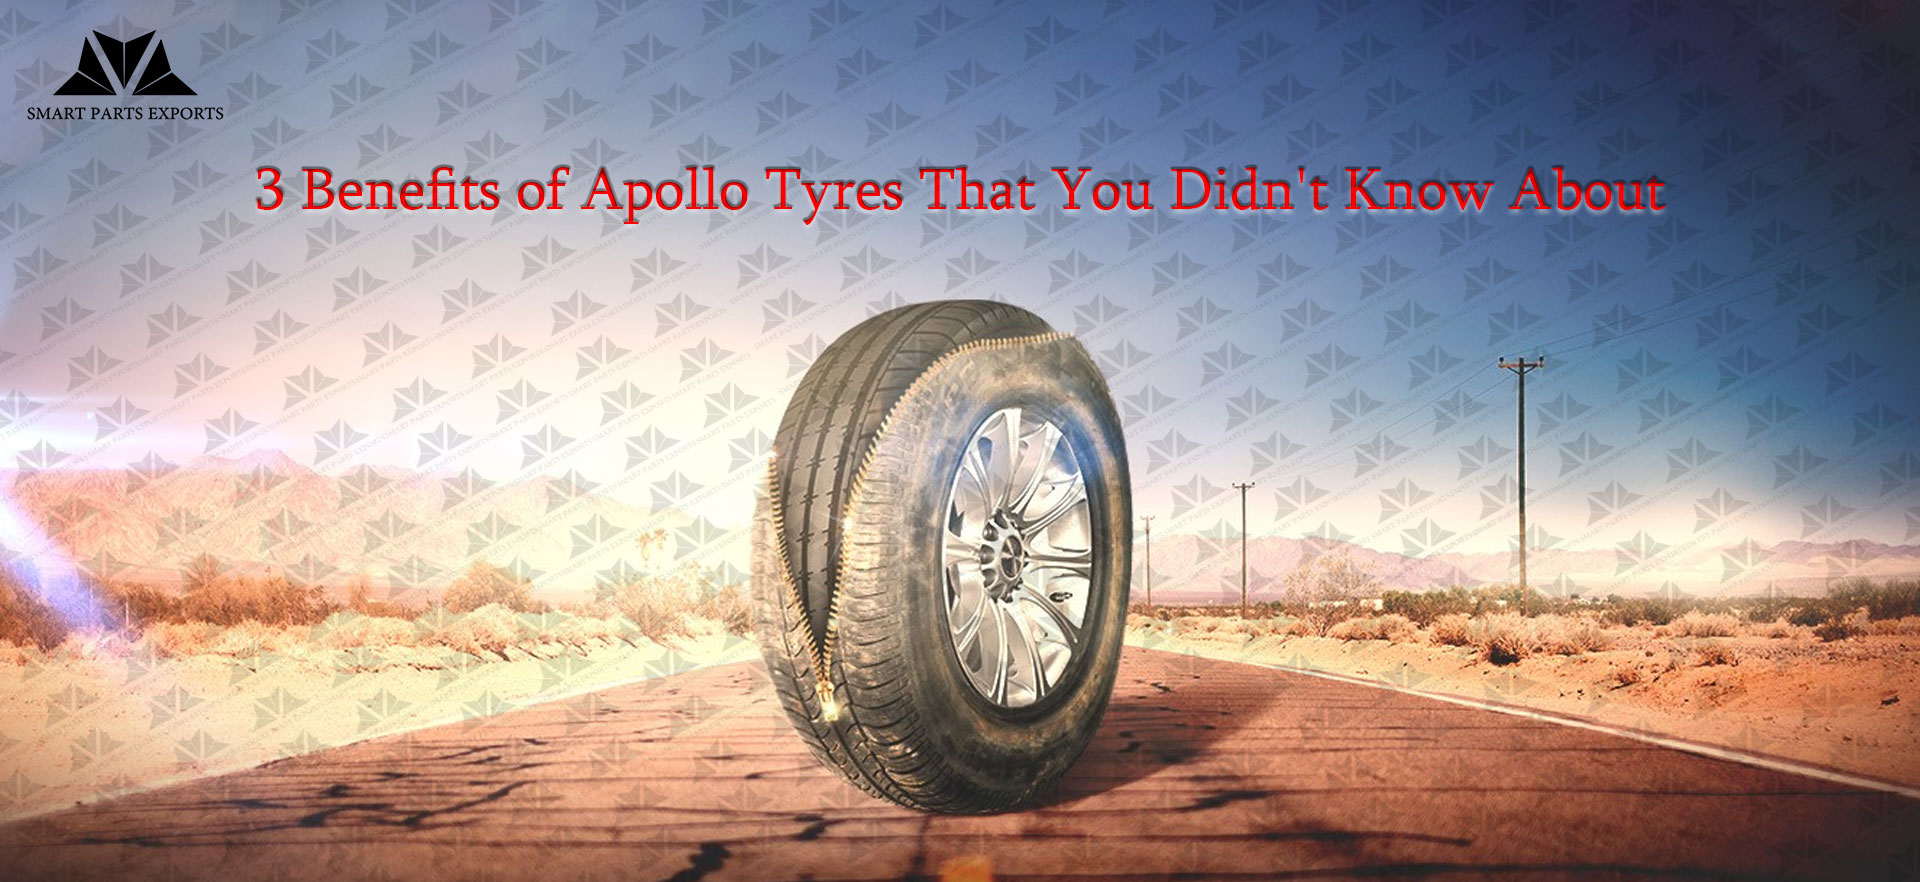 3 Benefits of Apollo Tyres That You Didn't Know About